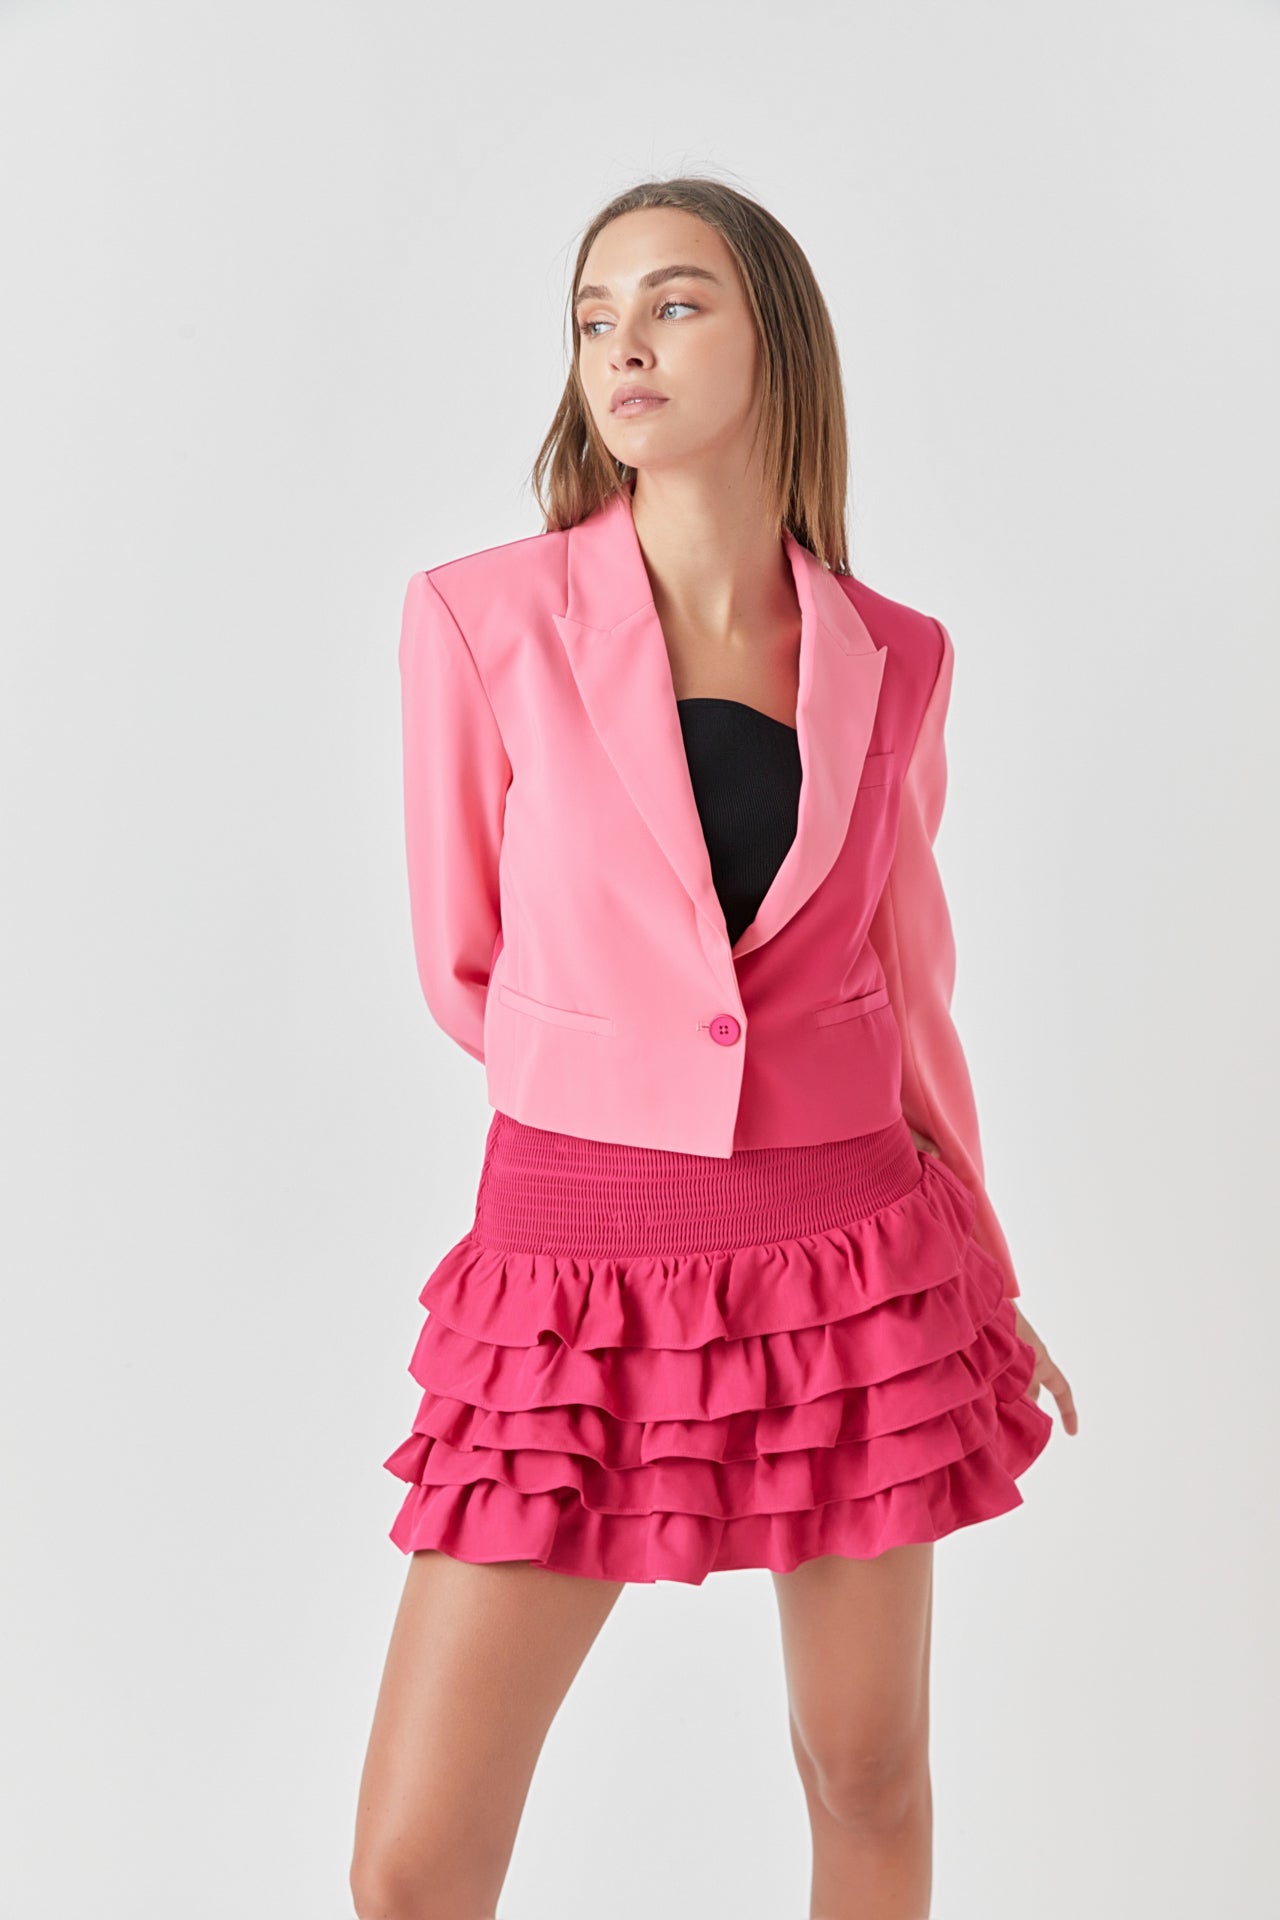 ENDLESS ROSE - Colorblock Short Blazer - BLAZERS available at Objectrare